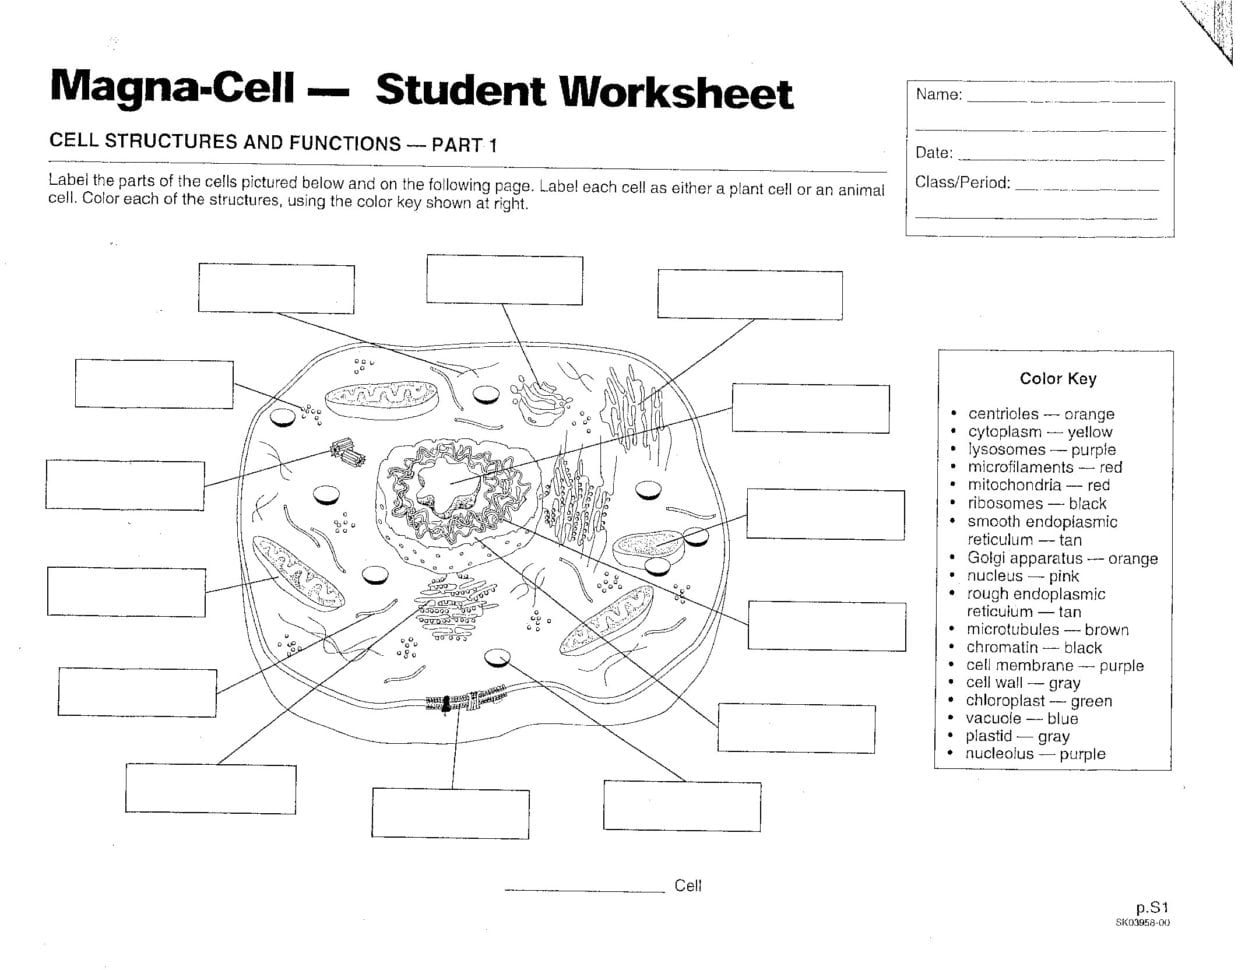 cells-alive-plant-cell-worksheet-answer-key-db-excel